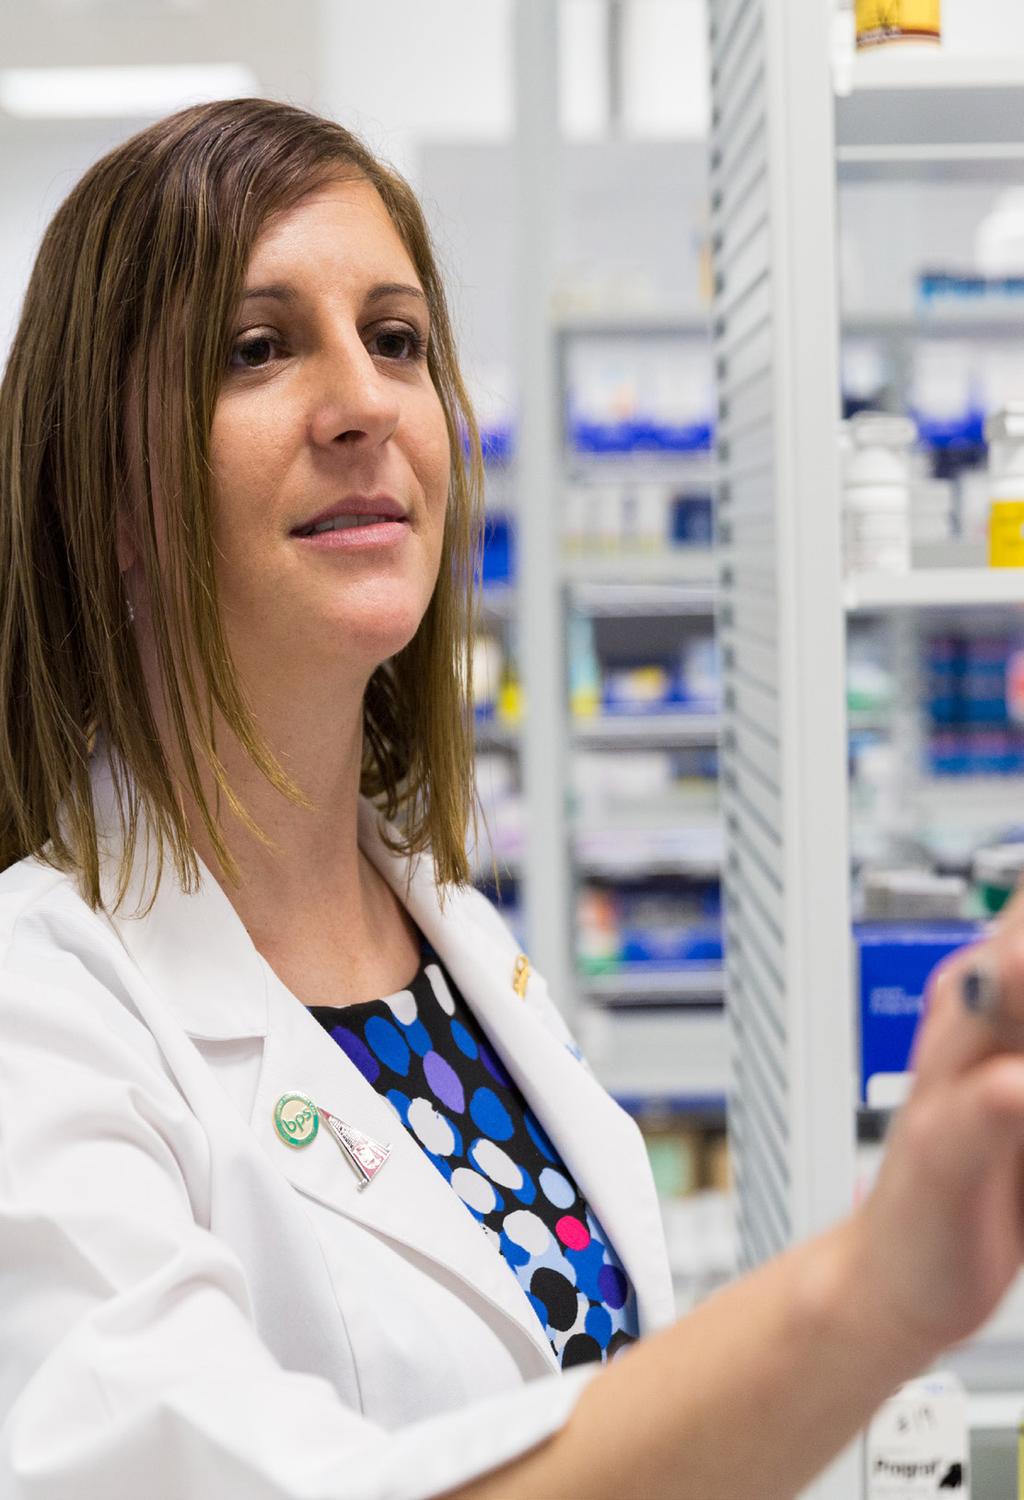 US Specialty Care Pharmacists Receive Prestigious Certifications US Specialty Care, WellDyneRx s industry-leading specialty pharmacy, is proud to announce that Marlette Oelofsen, Pharmacist in